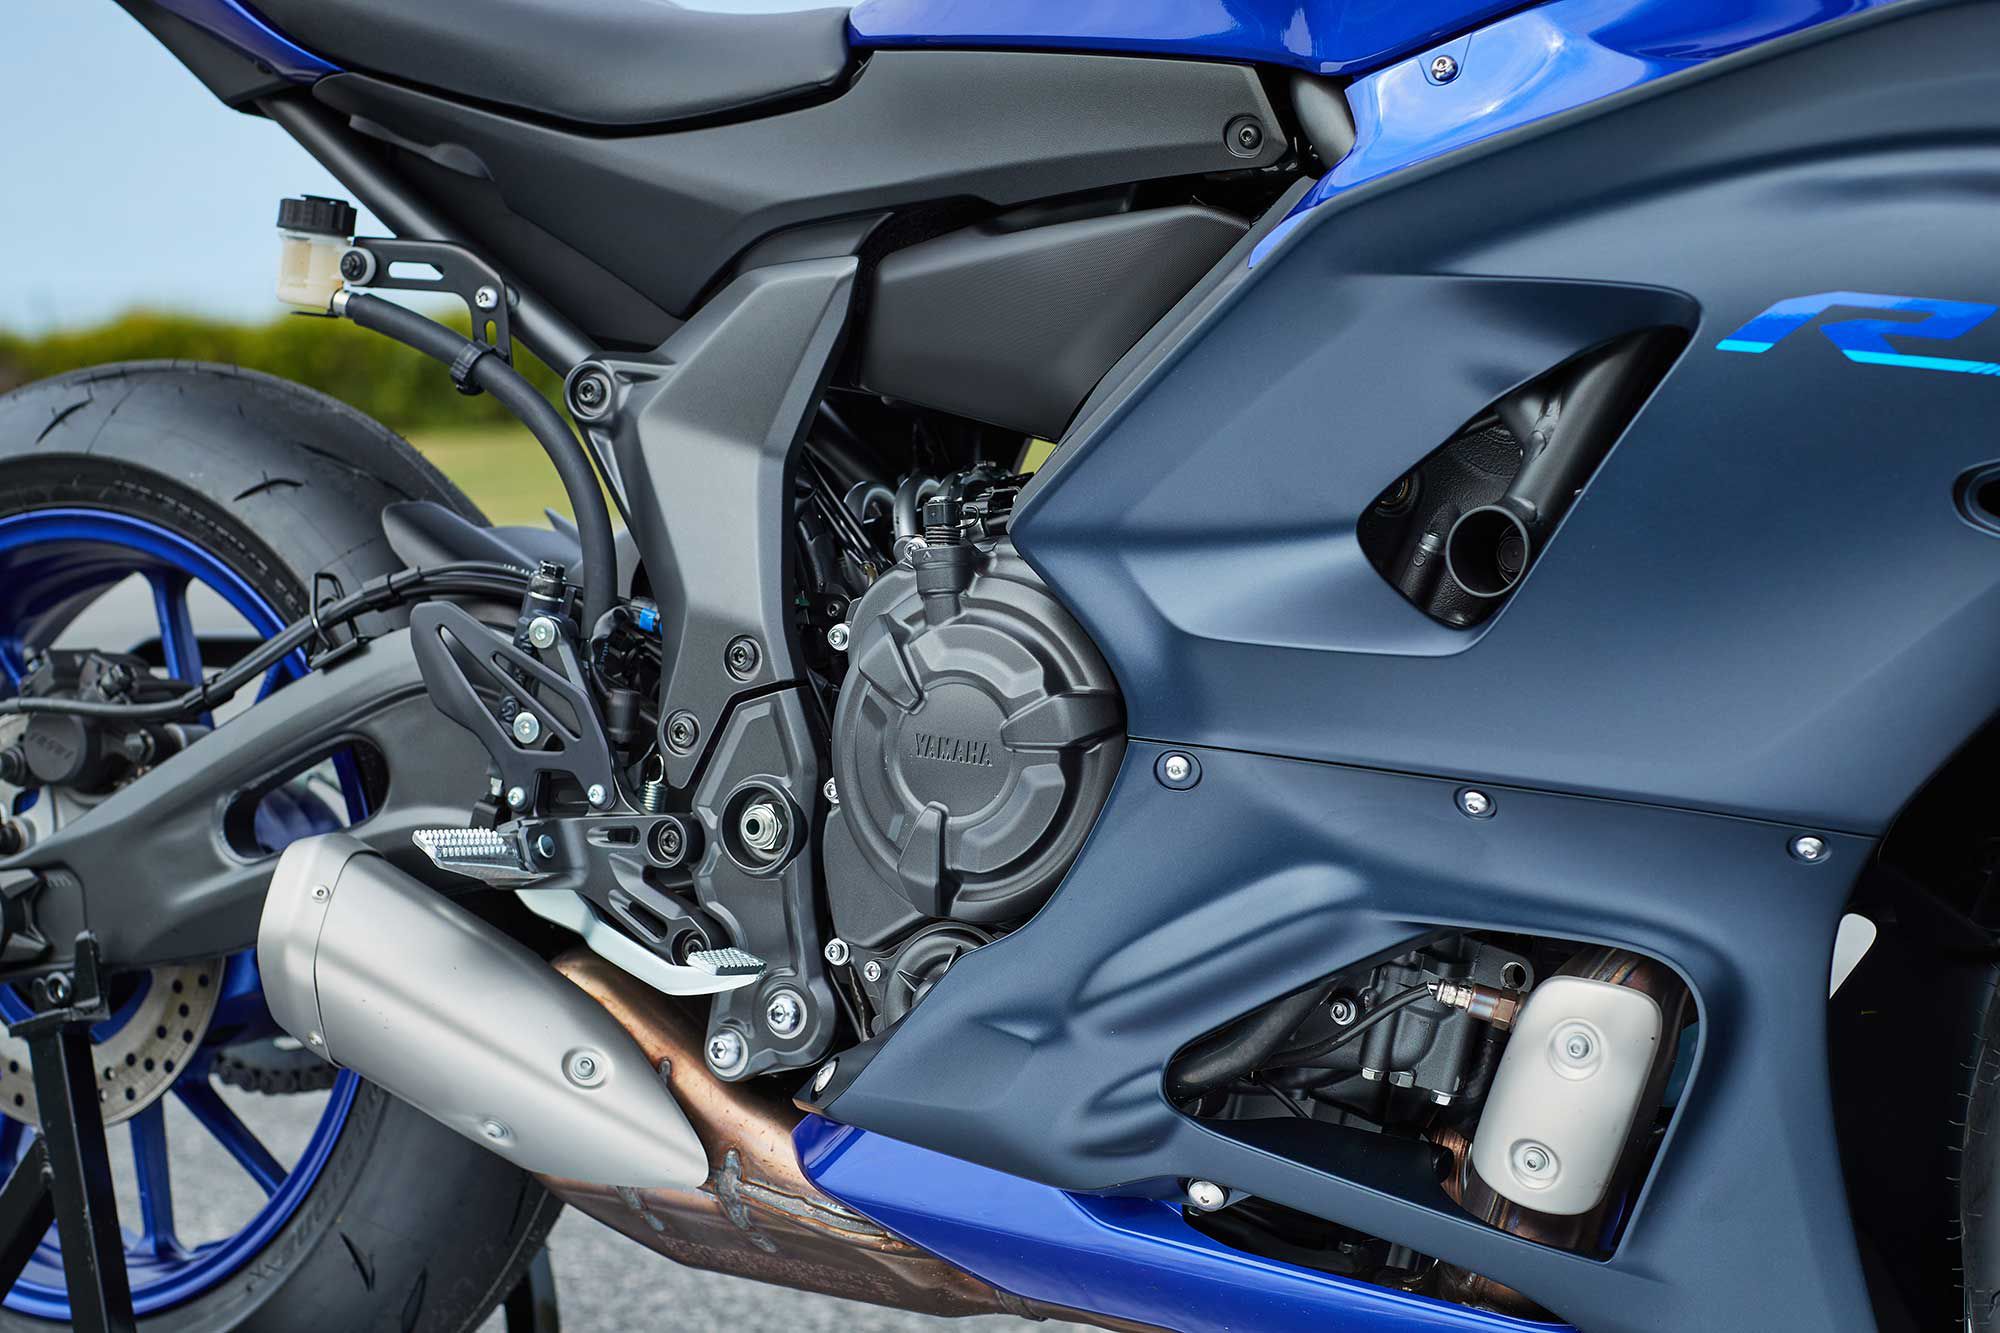 The R7 is powered by an MT-07-sourced 689cc CP2-generation parallel twin. Introduced for the 2015 MY, this engine employs a ultracompact design and uneven firing order giving it a V-twin-like character.